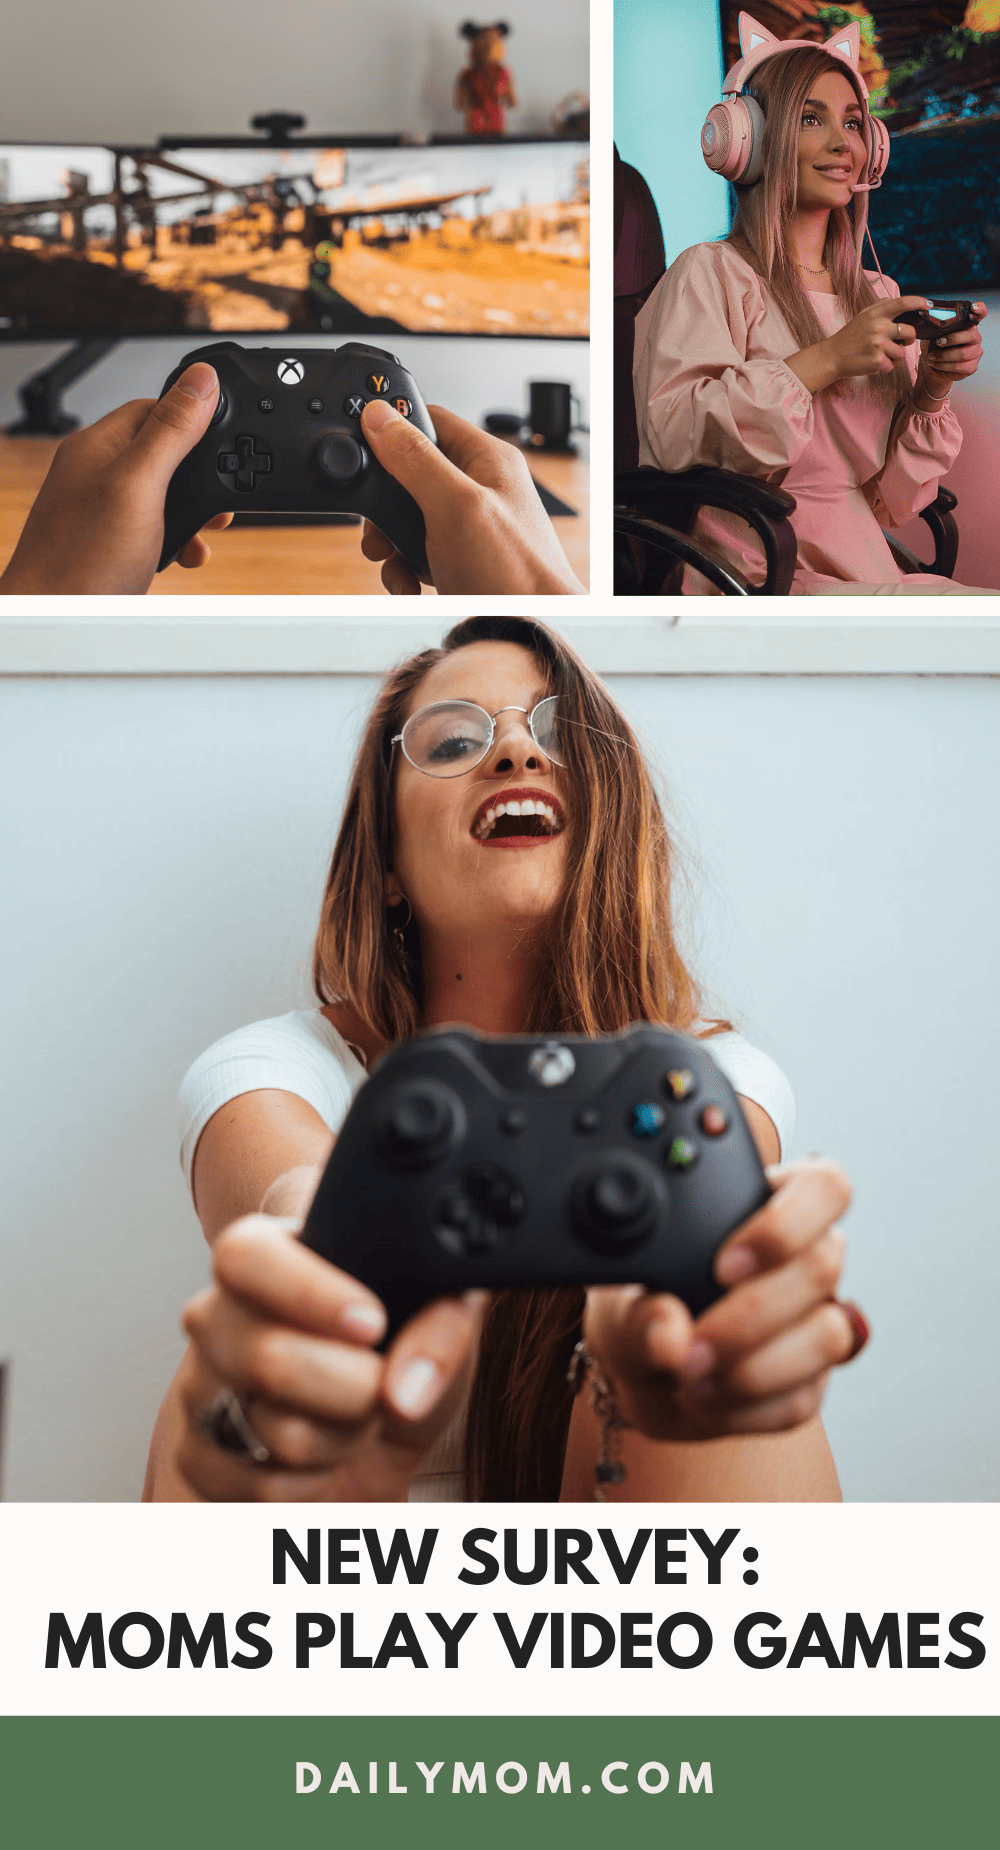 New Survey Reveals Majority Of Moms Play Video Games 8 Daily Mom, Magazine For Families